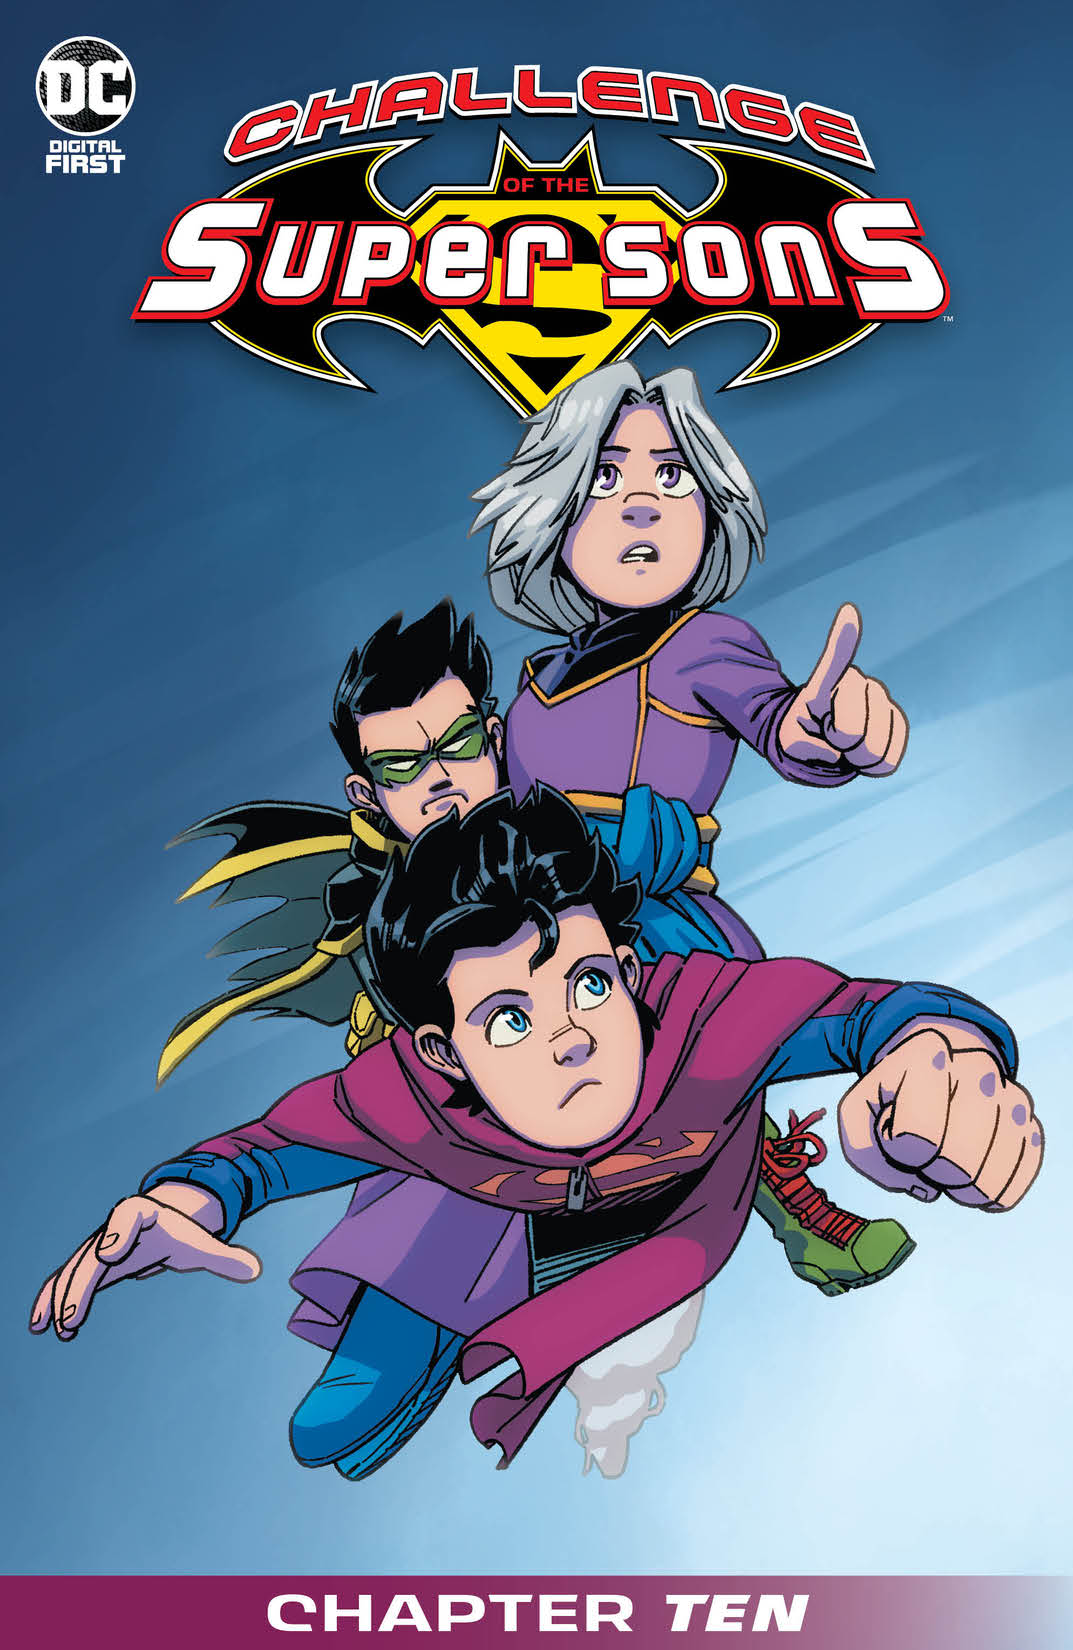 Challenge of the Super Sons #10 preview images